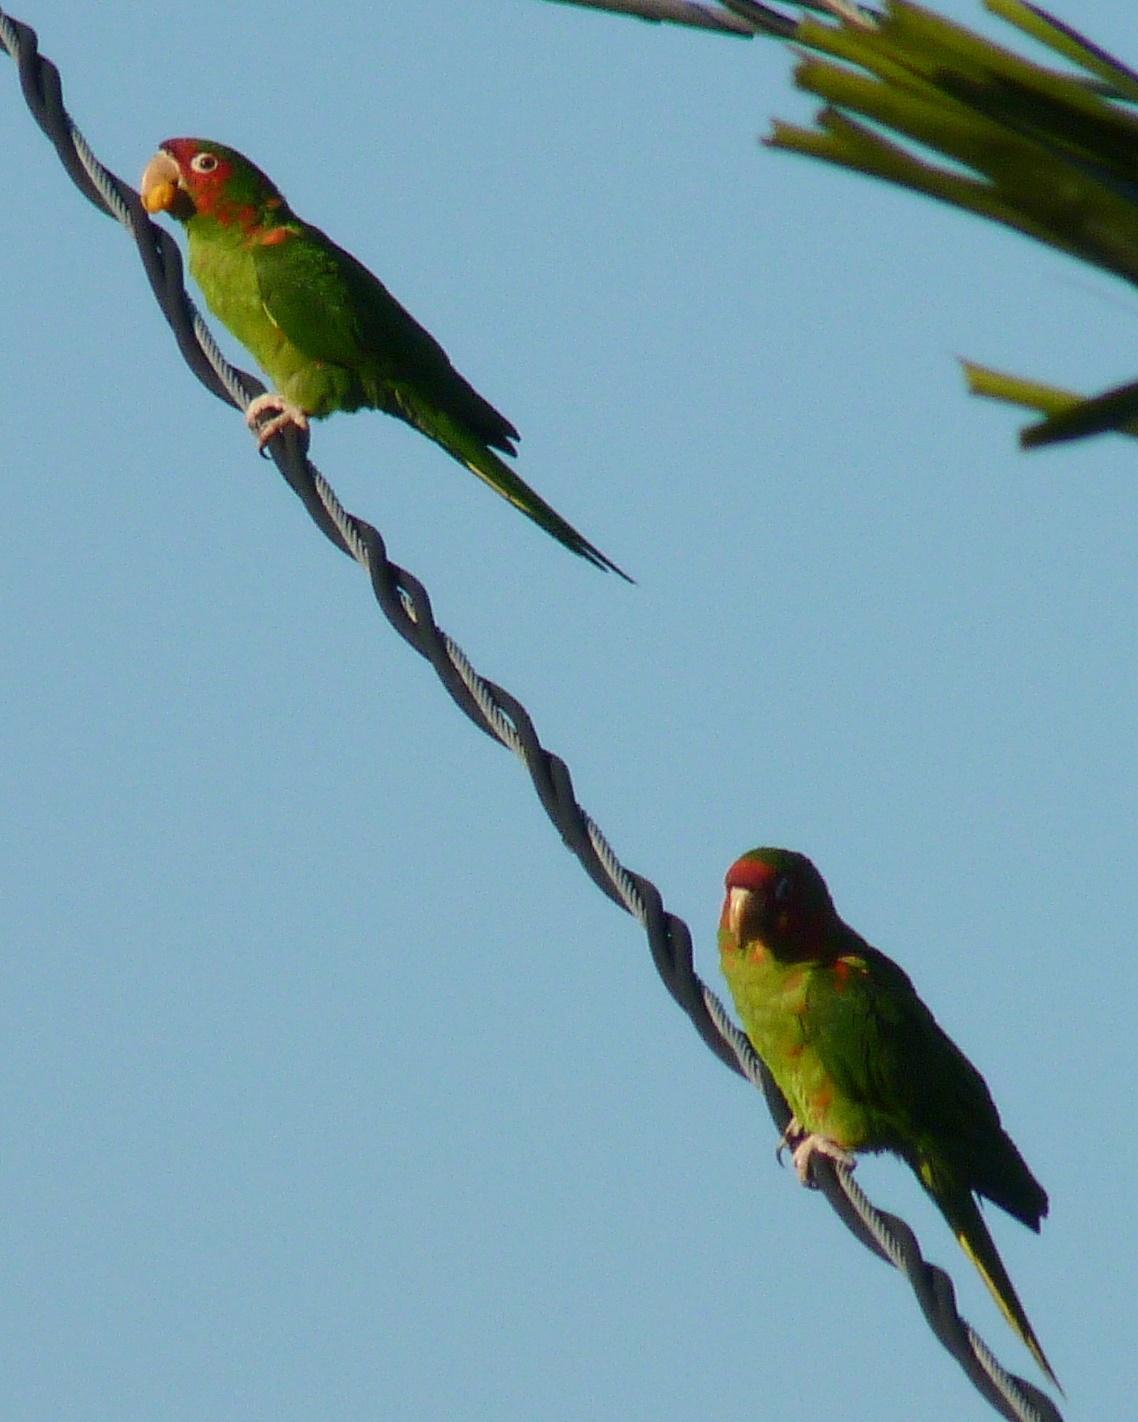 Mitred Parakeet Photo by Sean Fitzgerald